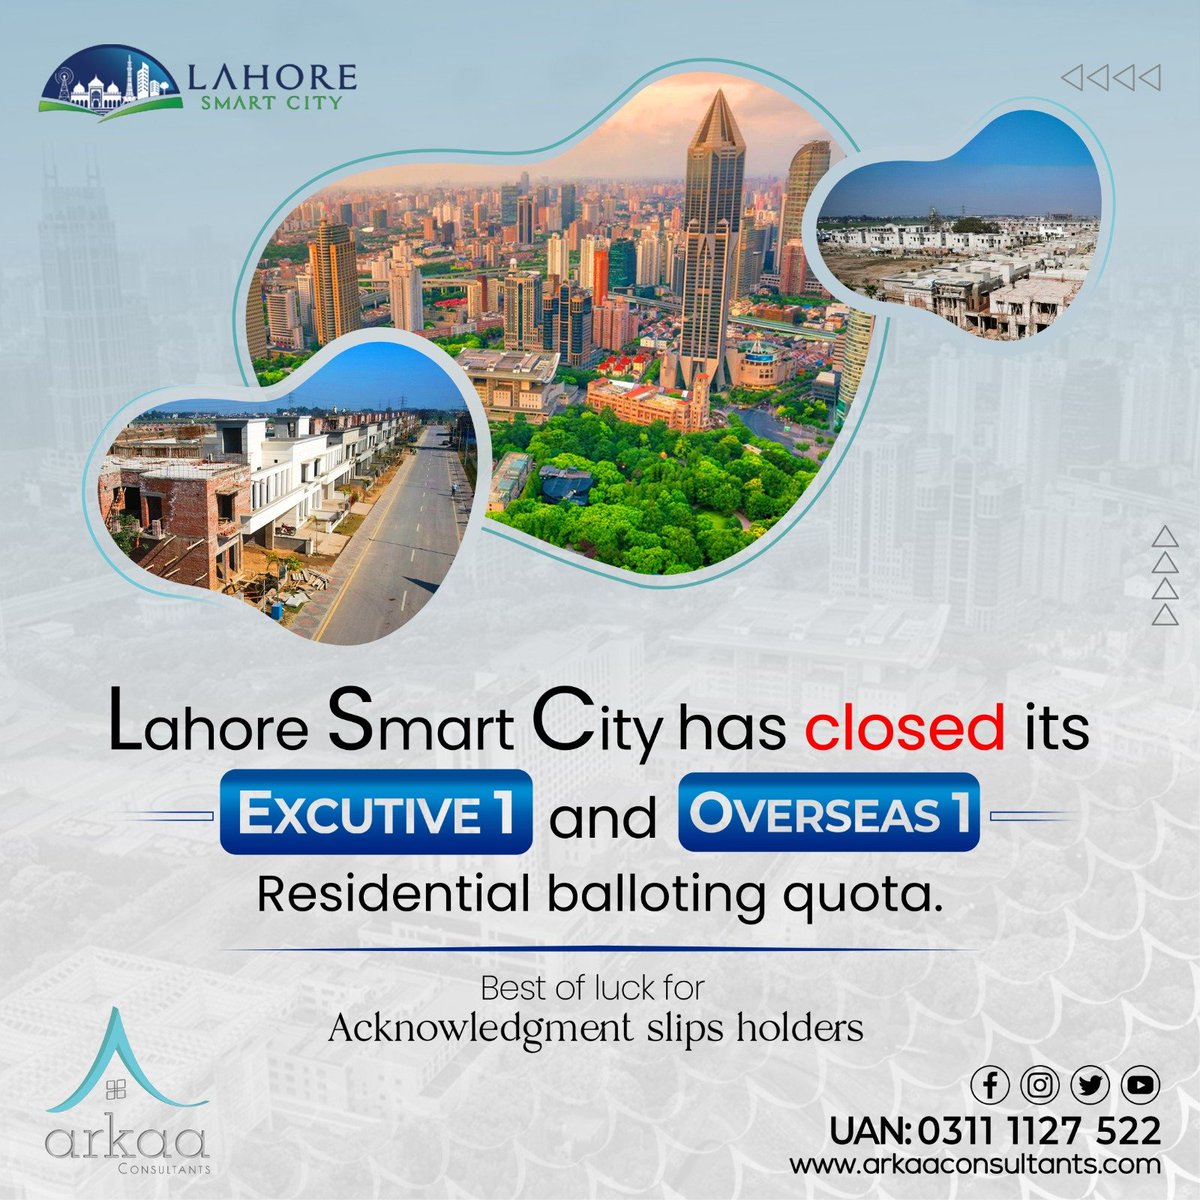 Lahore Smart City has Closed the Balloting Quota for Overseas Zone 1 and Executive Zone 1.

#lahoresmartcity #arkaaconsultants #smartinterchange #SmartCities #lscupdate #development #update #LSC #Lahore #DevelopmentUpdates #Progress #balloting #overseasblock #executiveblock